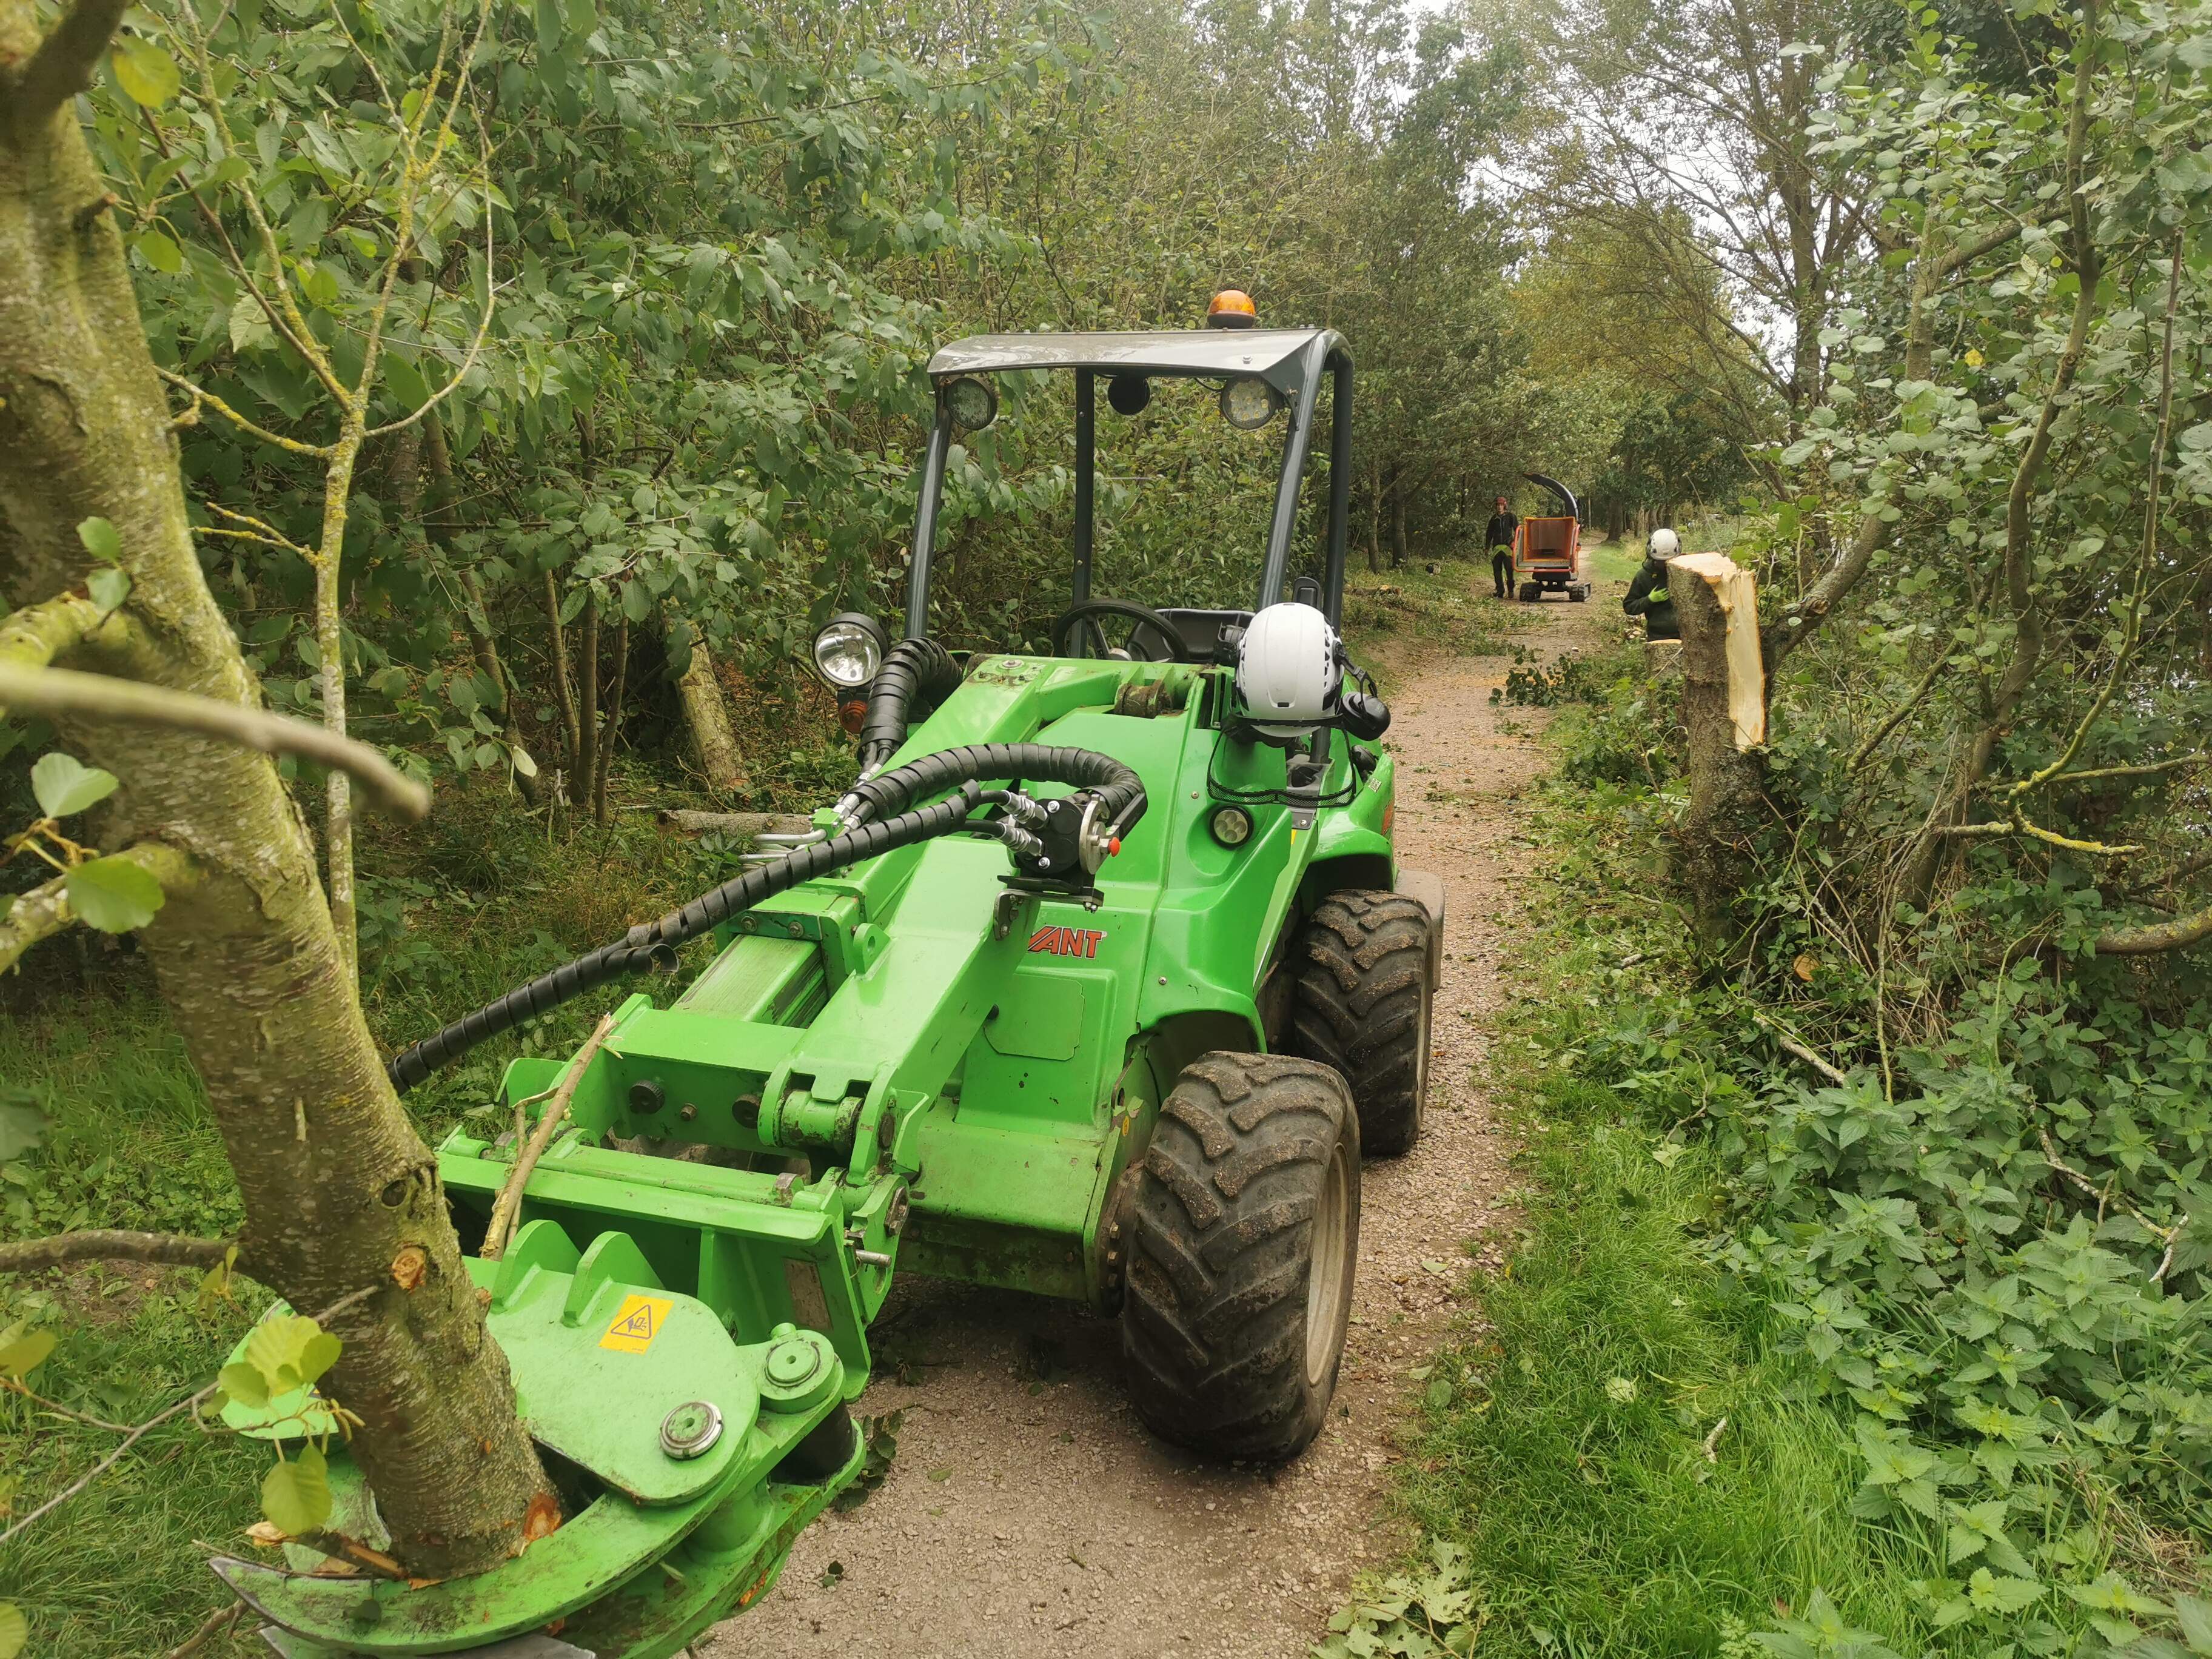 Footpath clearance round the lakes at Barton